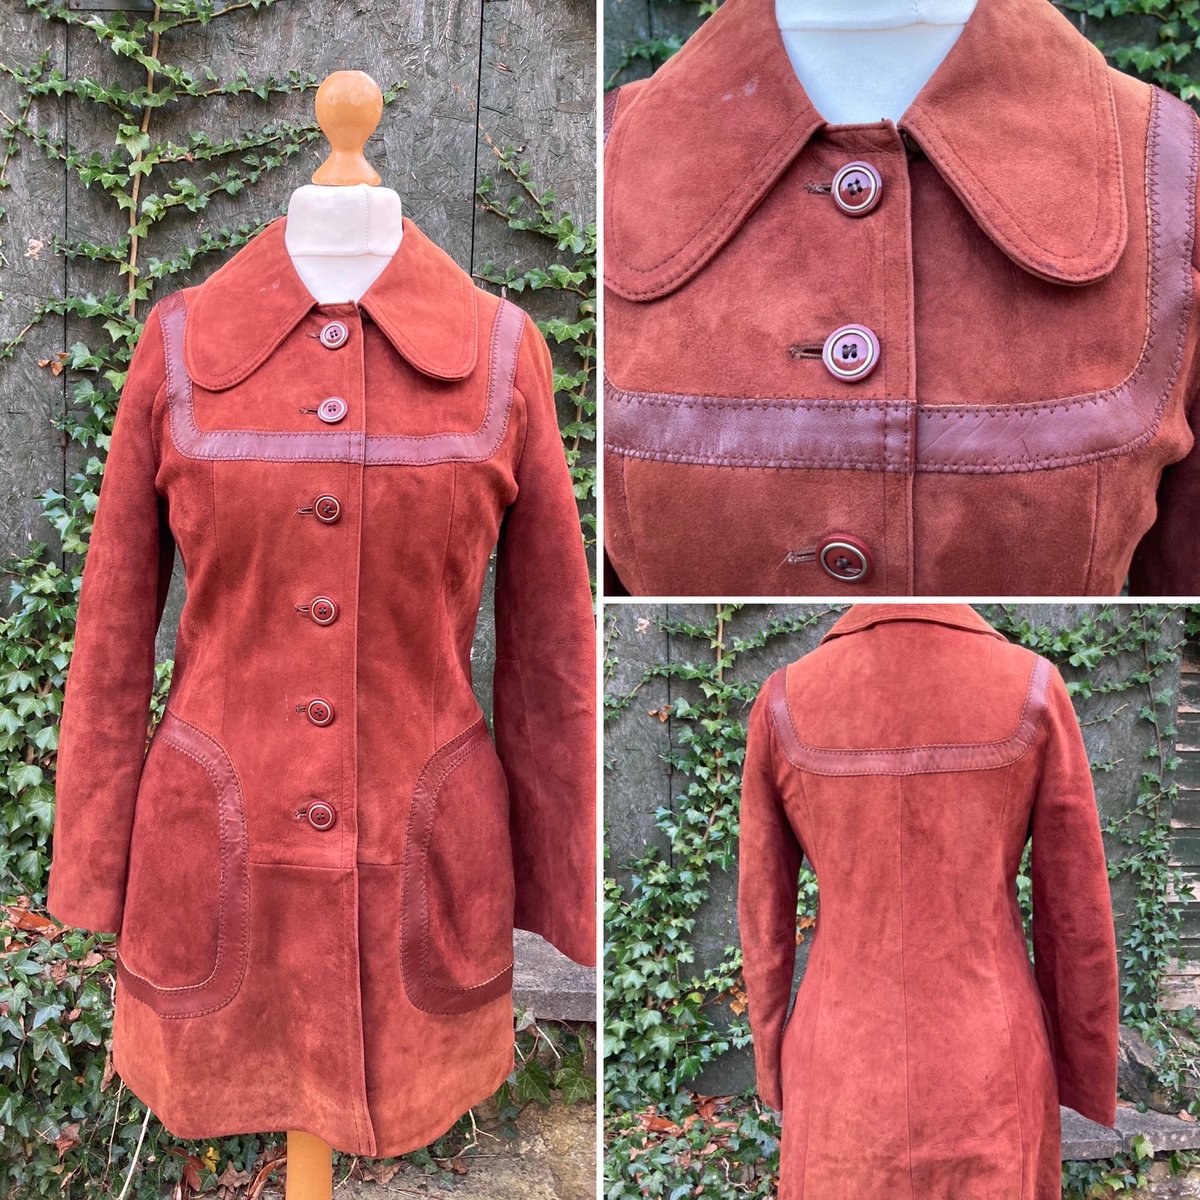 Hello my little #vintageshowandsell peeps , it’s been a while but I’m back for the Wednesday group hug this time , coming soon fab #1970sStyle #suedecoat #modcoat  iconic #vintagecoat #GINGERMINTVINTAGE leather trim - UK12, US8 #Classic70s #VintageFashion #70s #slow-fashion